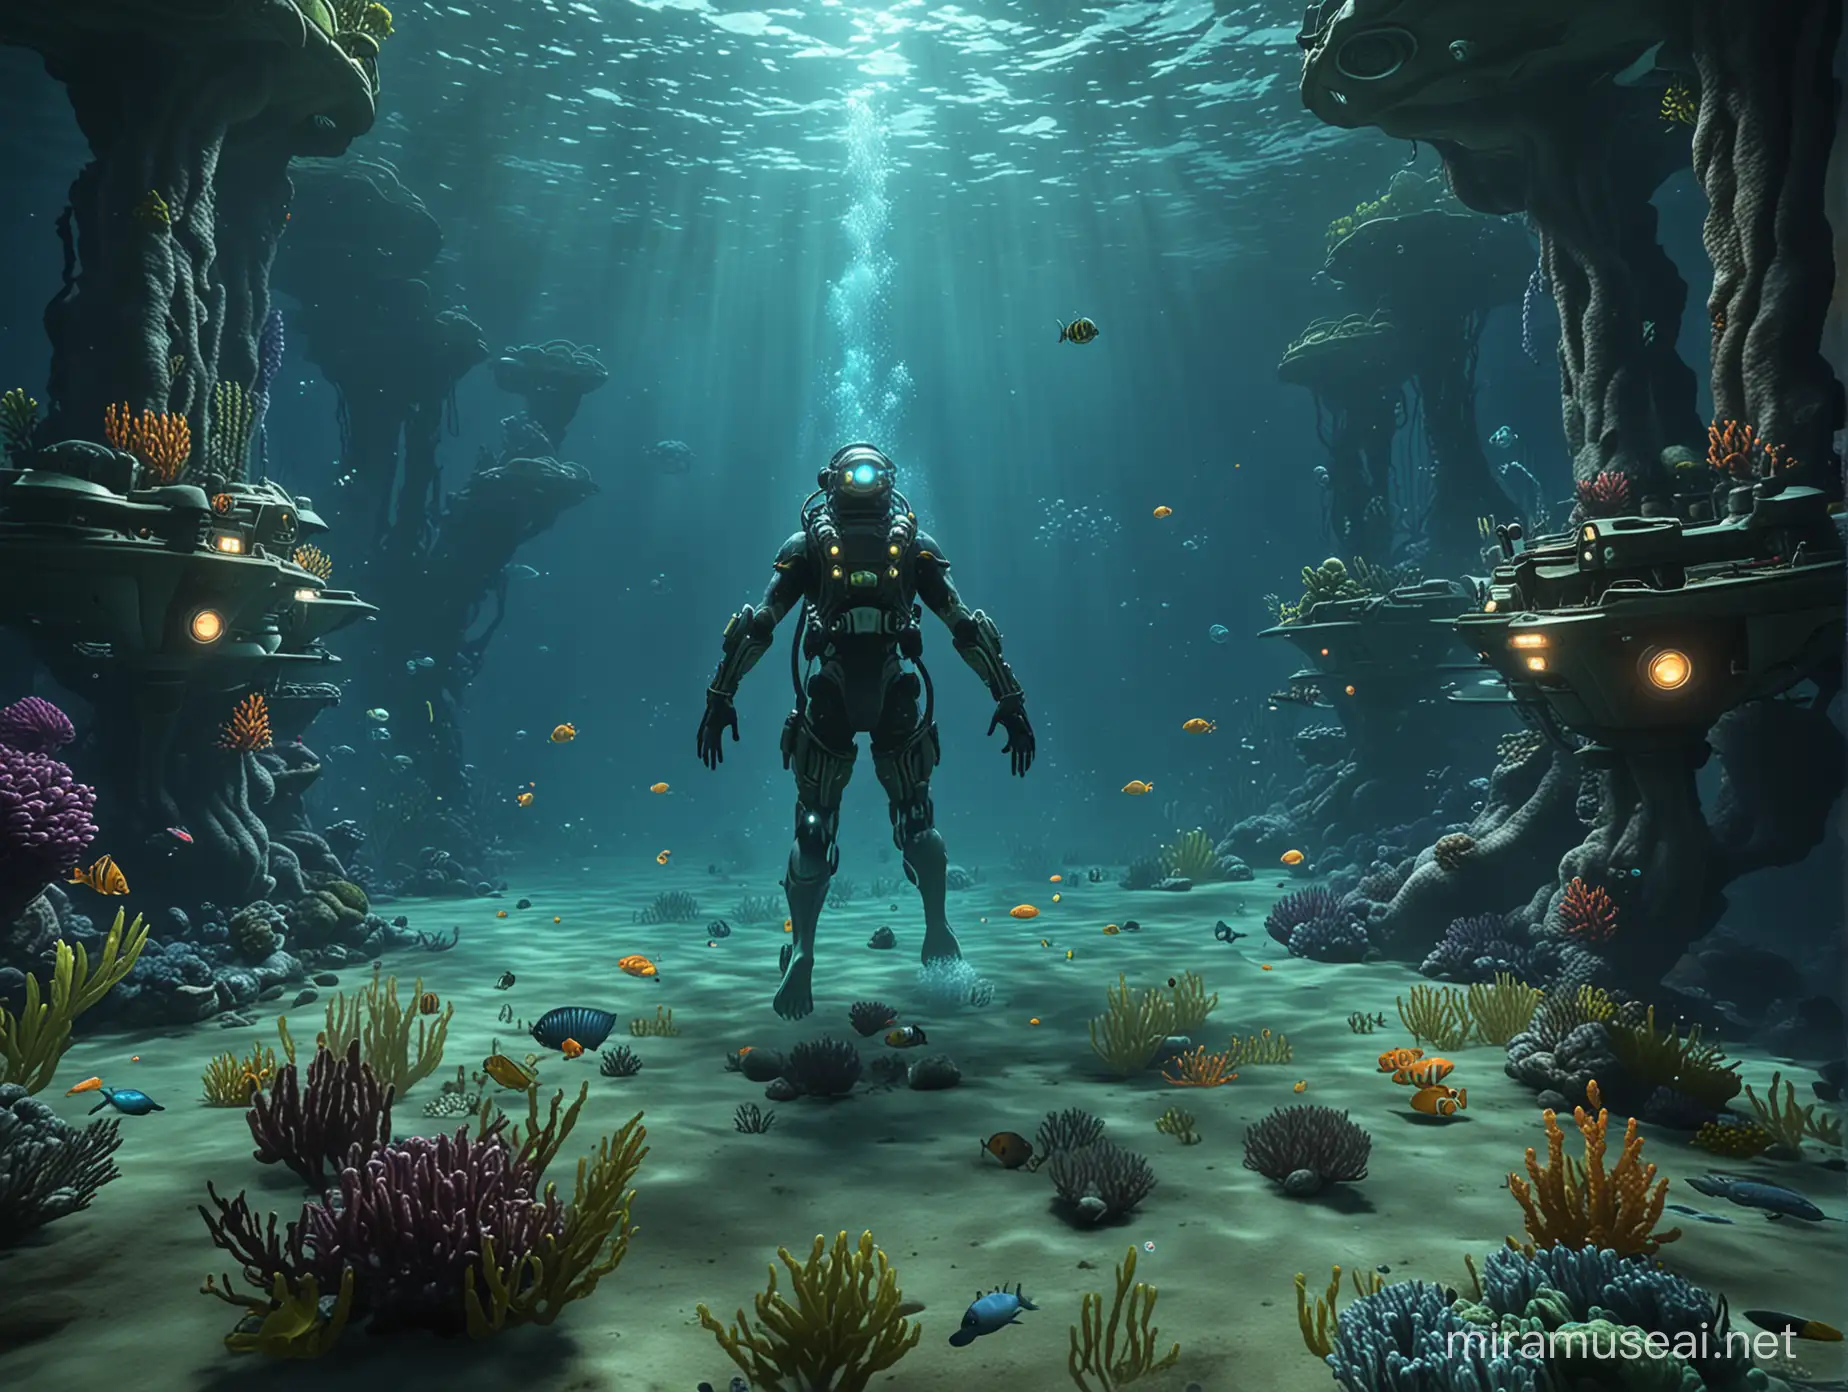 Subnautica in base two persons,Horror,Scary,Underwater
